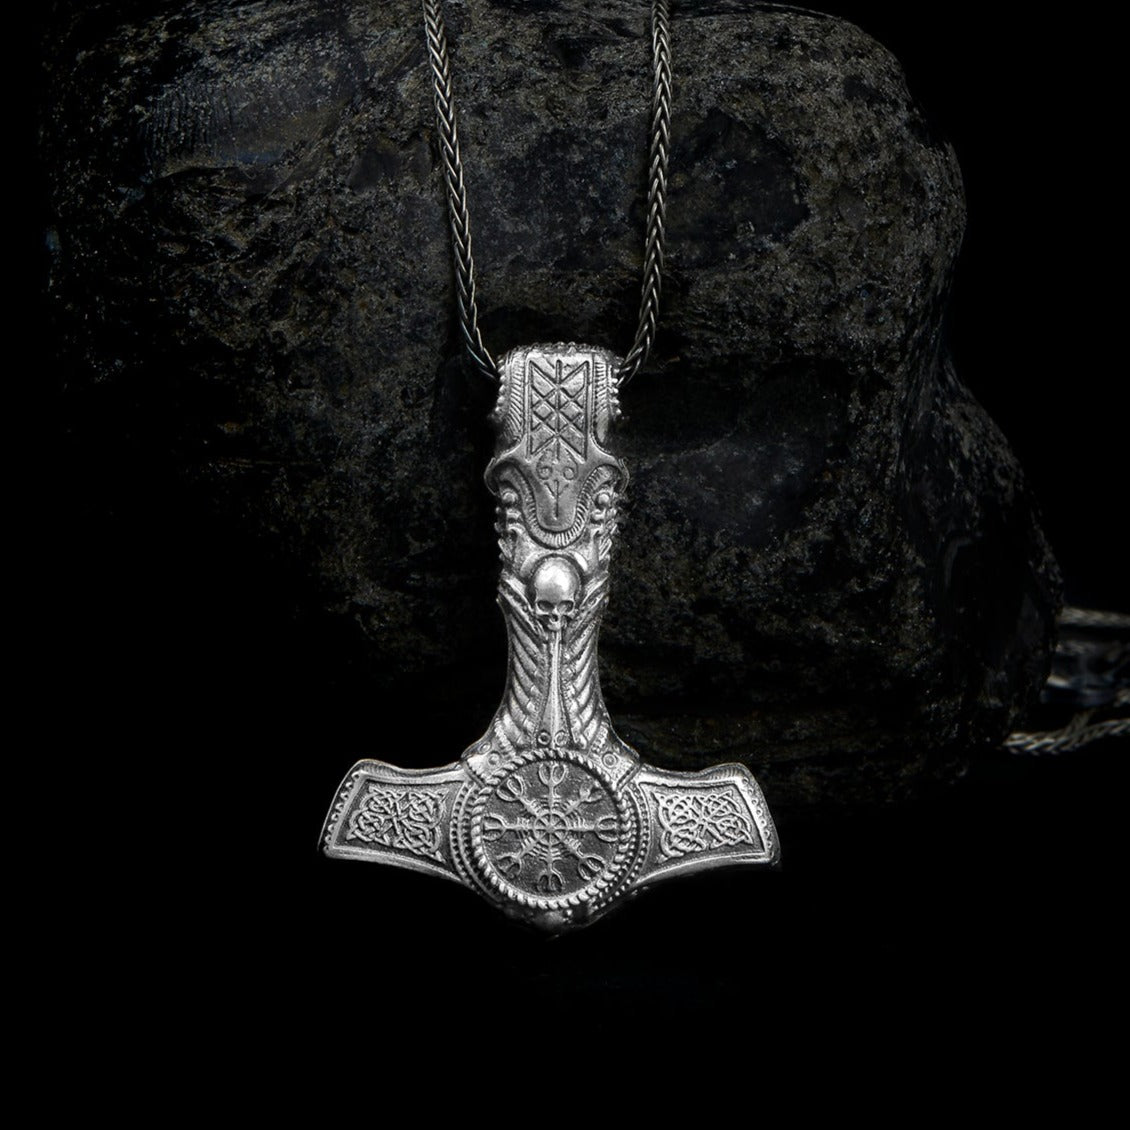 Close-up of a Sterling Silver Thor Hammer Necklace, reflecting Norse artistry and legend. Mjolnir Pendant, God of Thunder, Legendary weapon